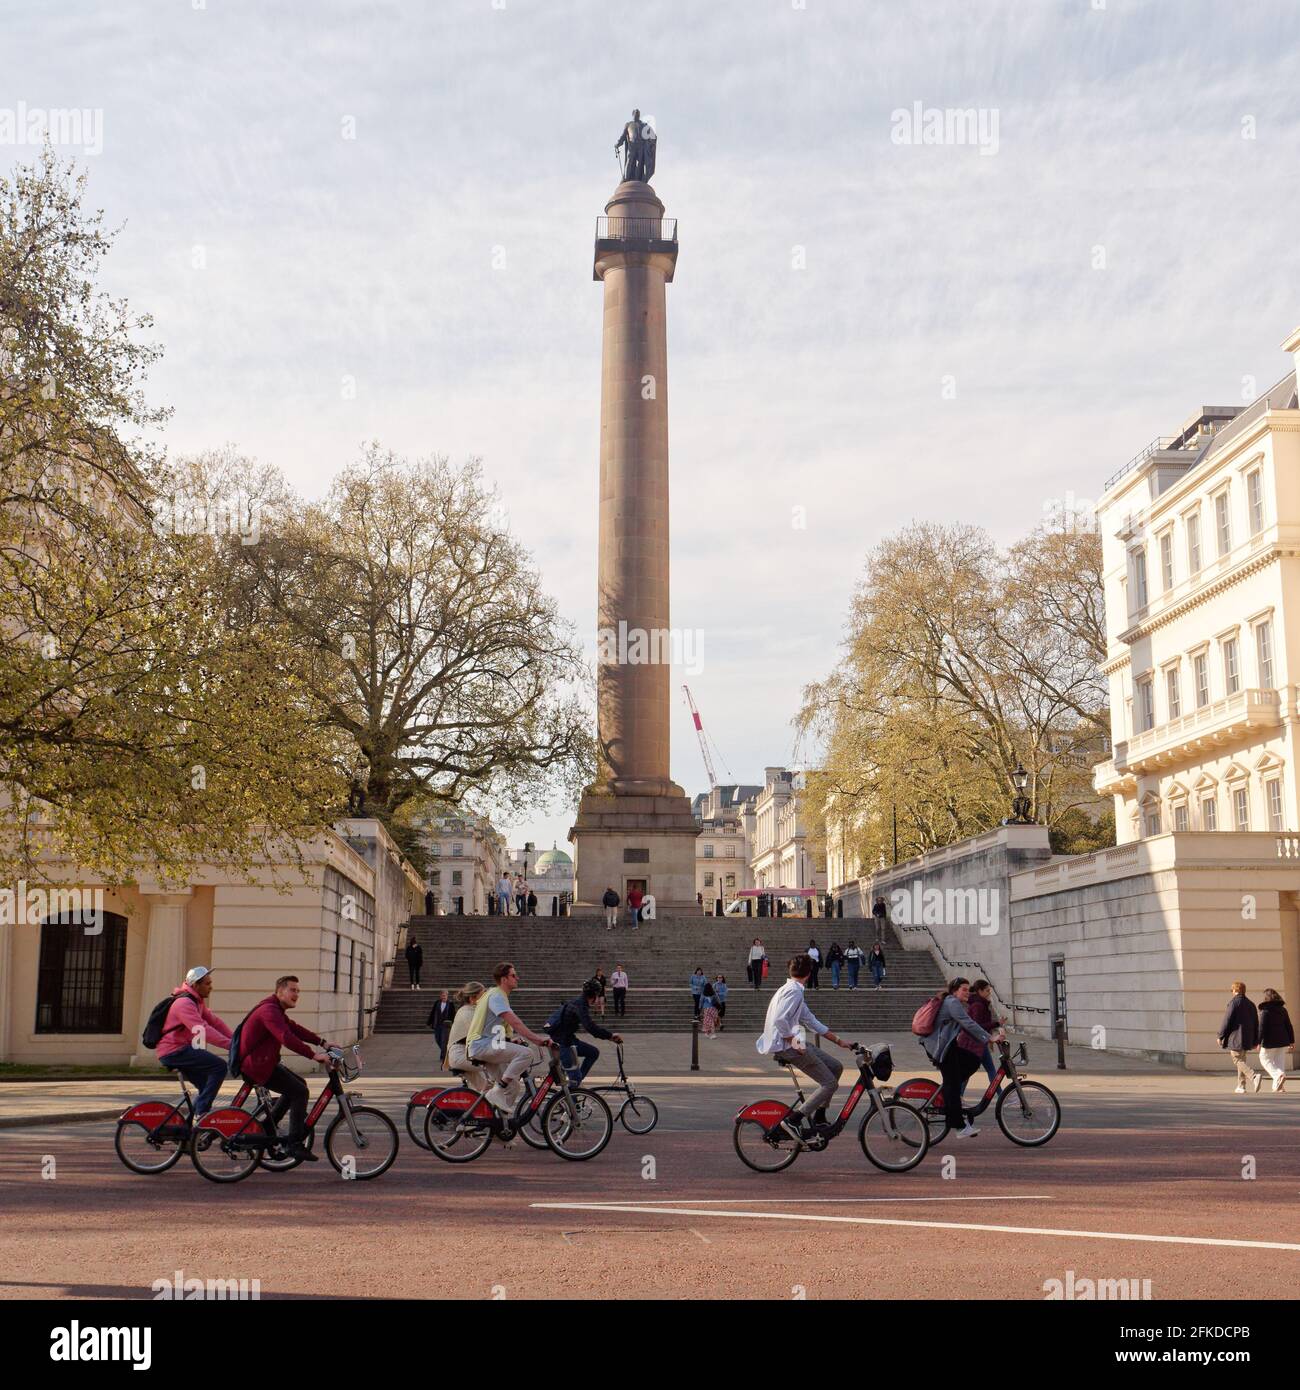 London, Greater London, England - Apr 24 2021: Cyclists on The Mall in front of the Duke of York Statue in Waterloo Place. Stock Photo